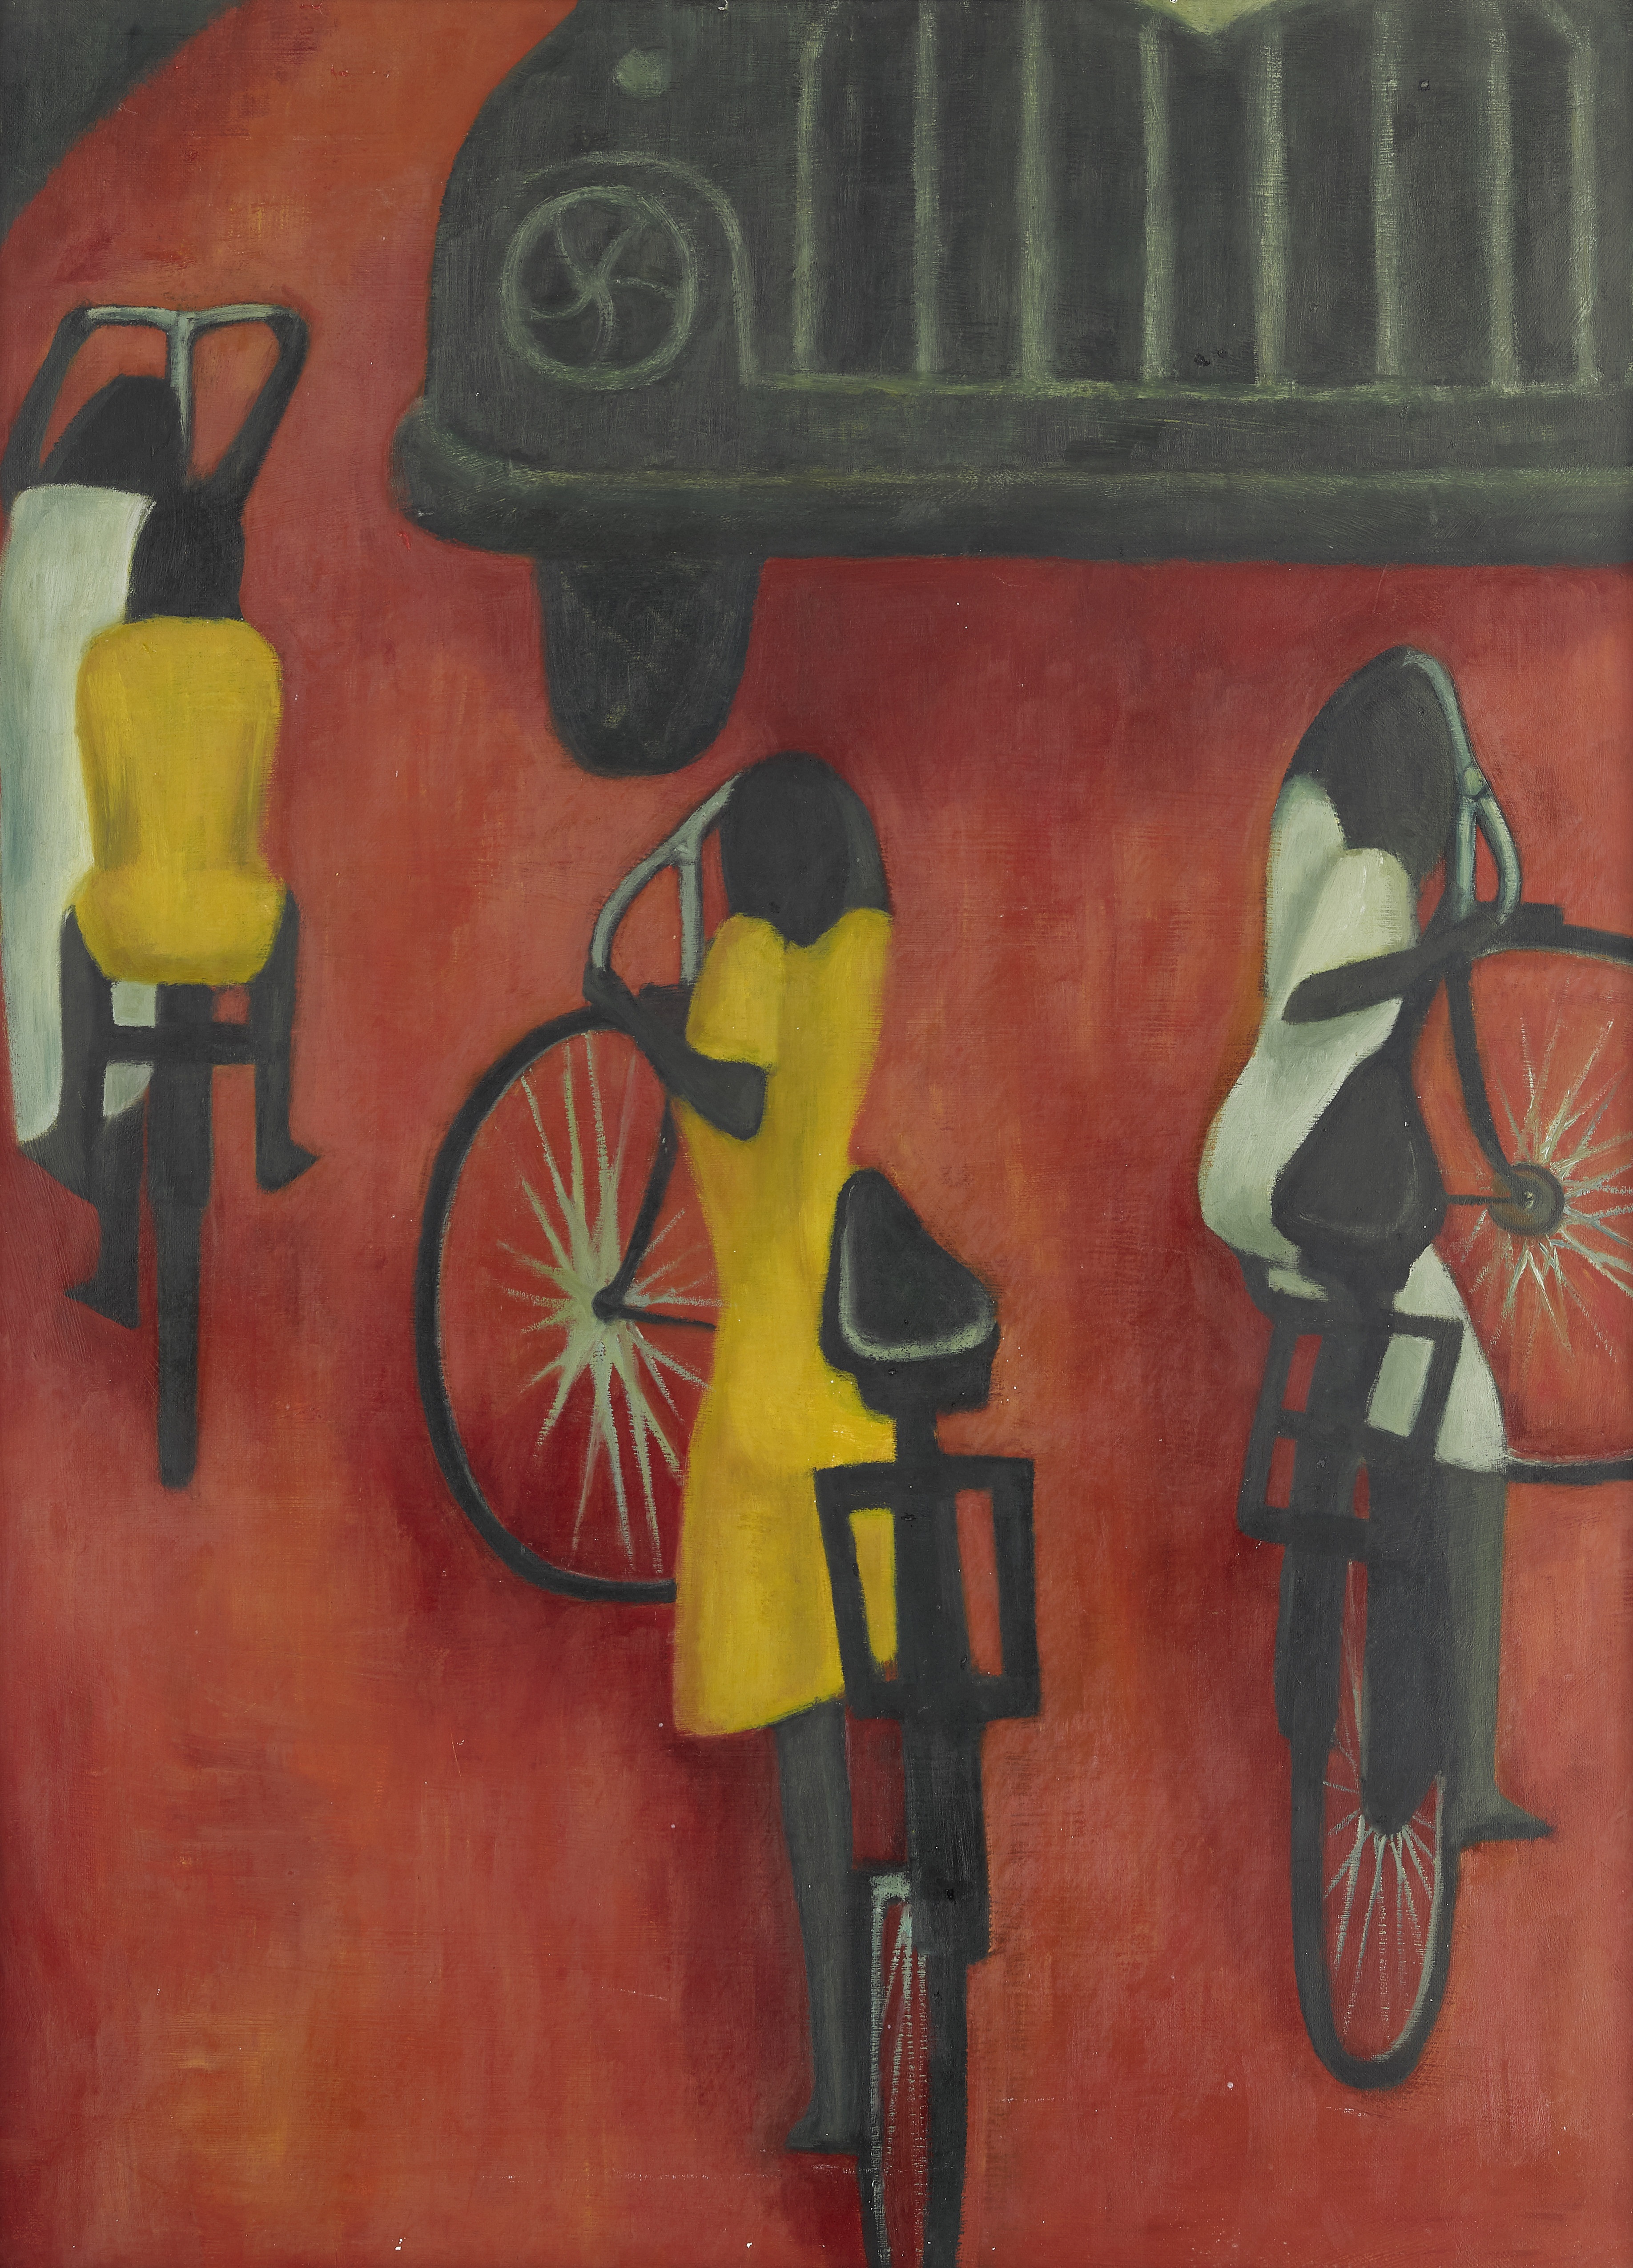 Children on Cycles, an early 1960s work by Nigerian artist Demas Nwoko.